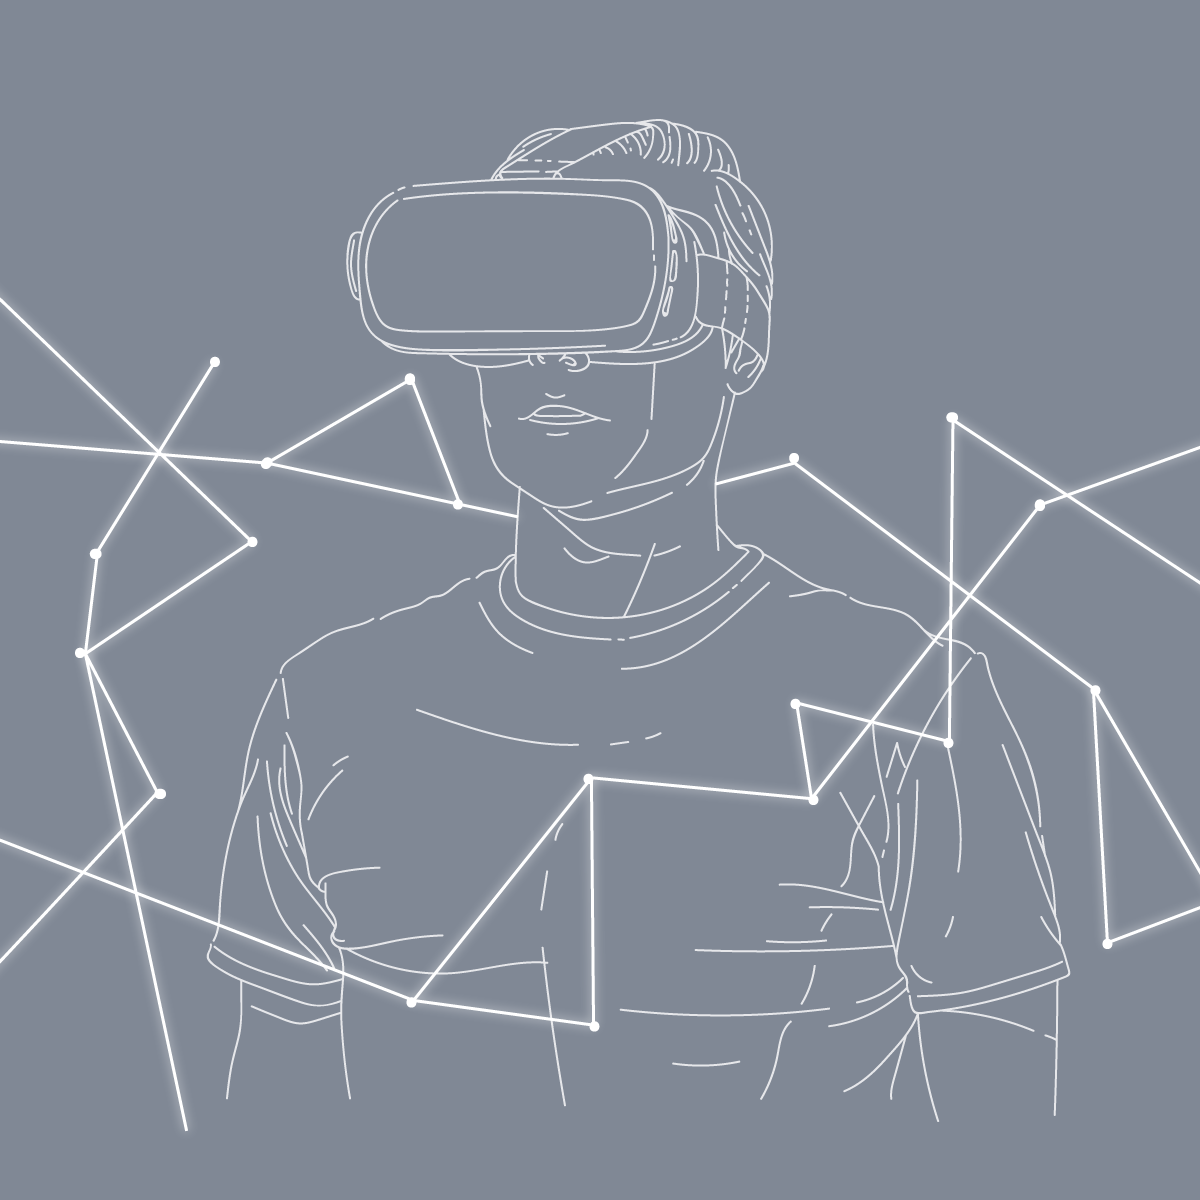 Boy with virtual reality headset illustration